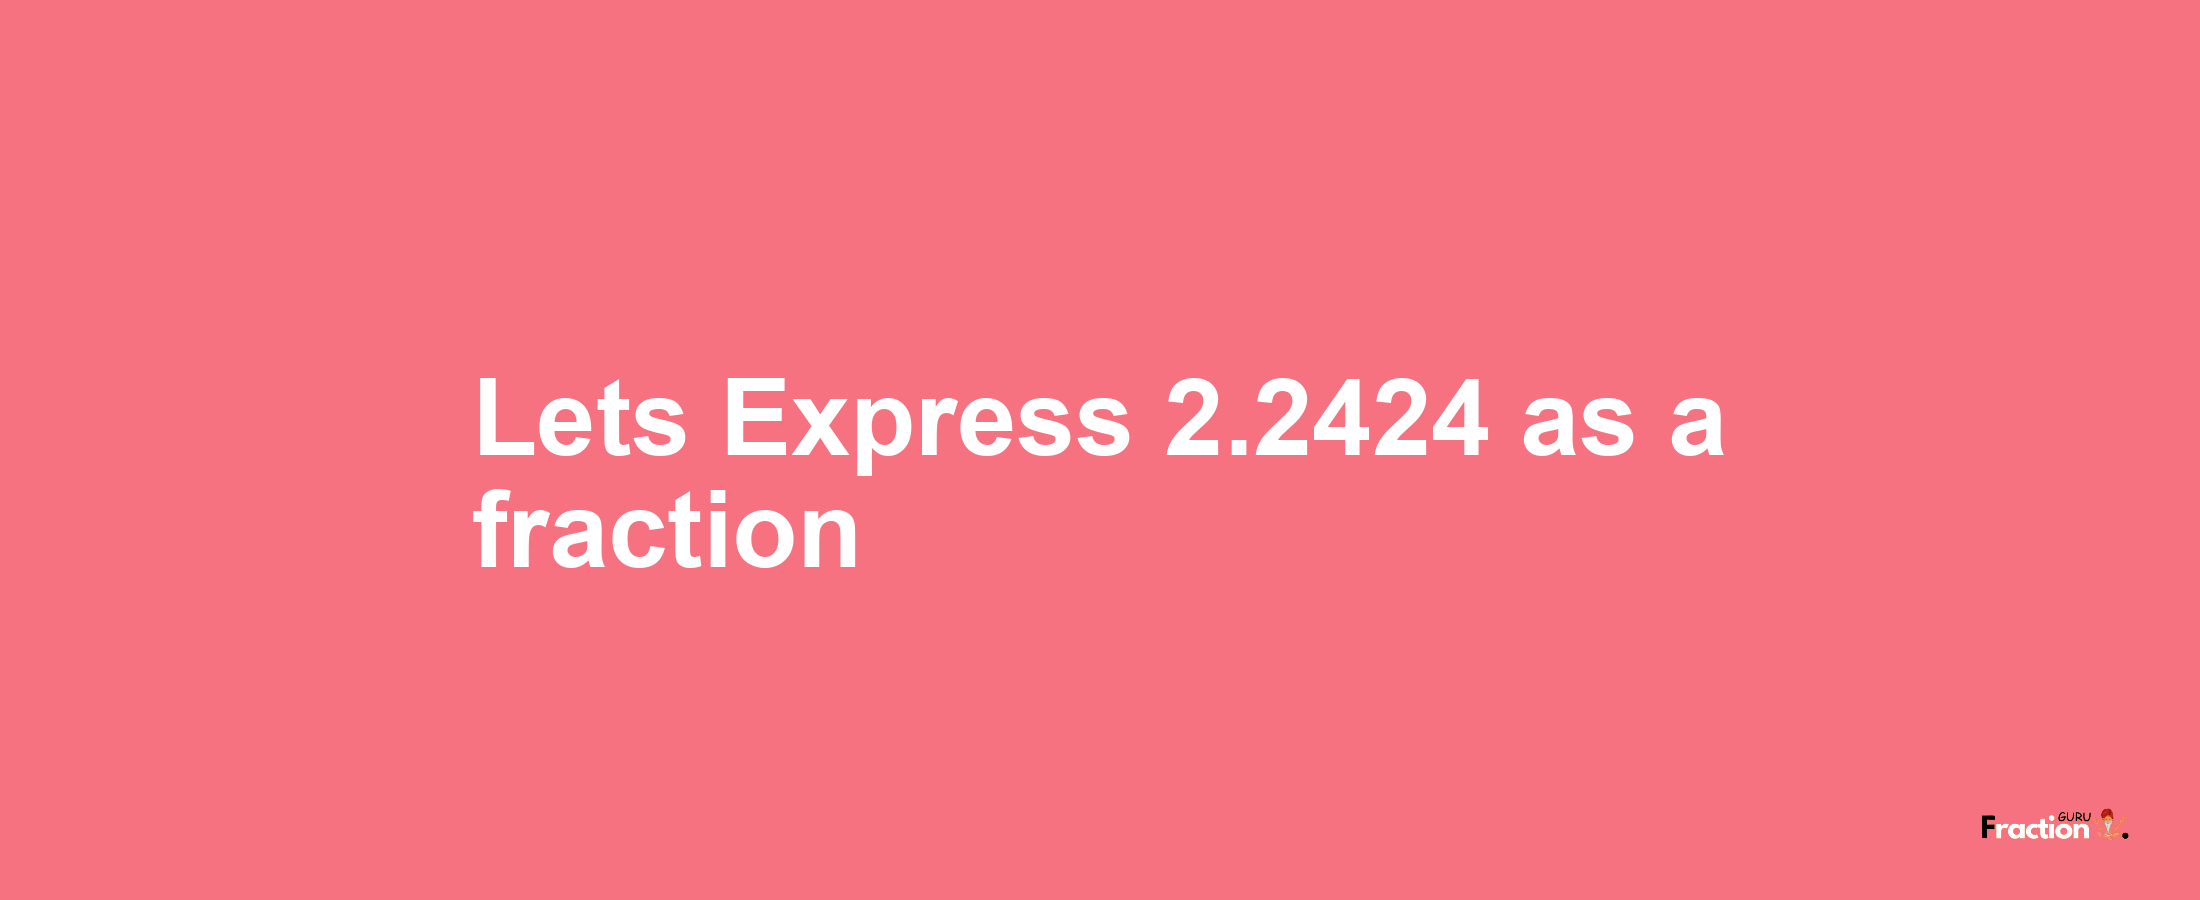 Lets Express 2.2424 as afraction